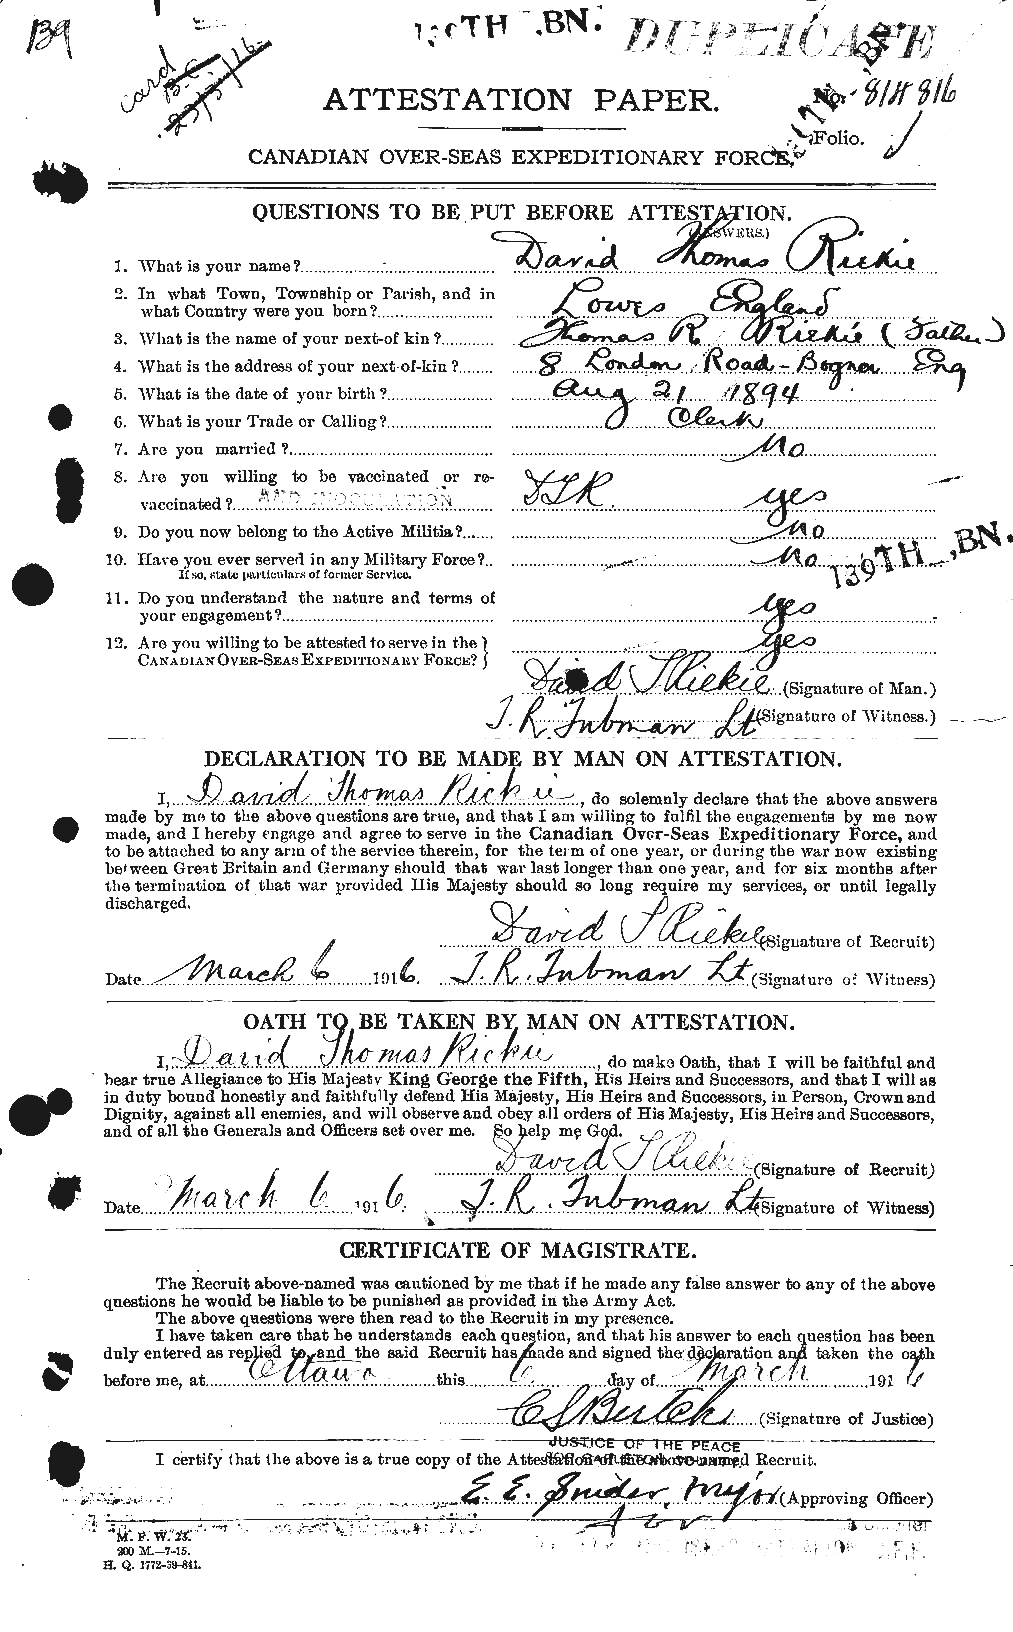 Personnel Records of the First World War - CEF 603062a